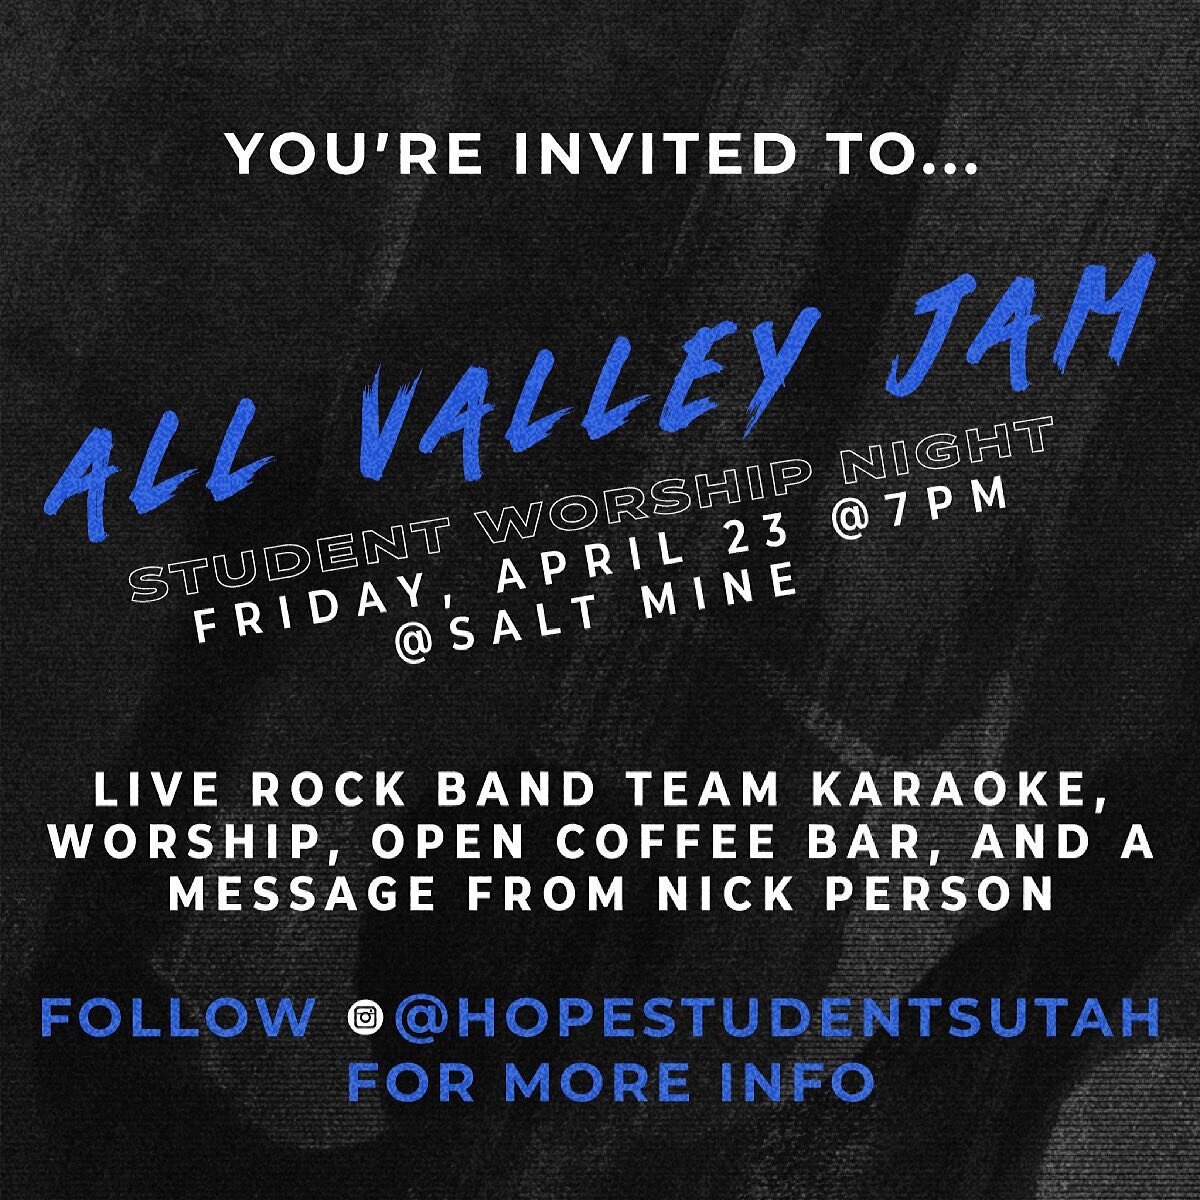 All Valley Jam is TOMORROW!!!! Come hang with students from all over the valley! Awesome games, worship, and a message from @nptheambassador who spoke earlier today at @intermountainchristianschool! Invite a friend!